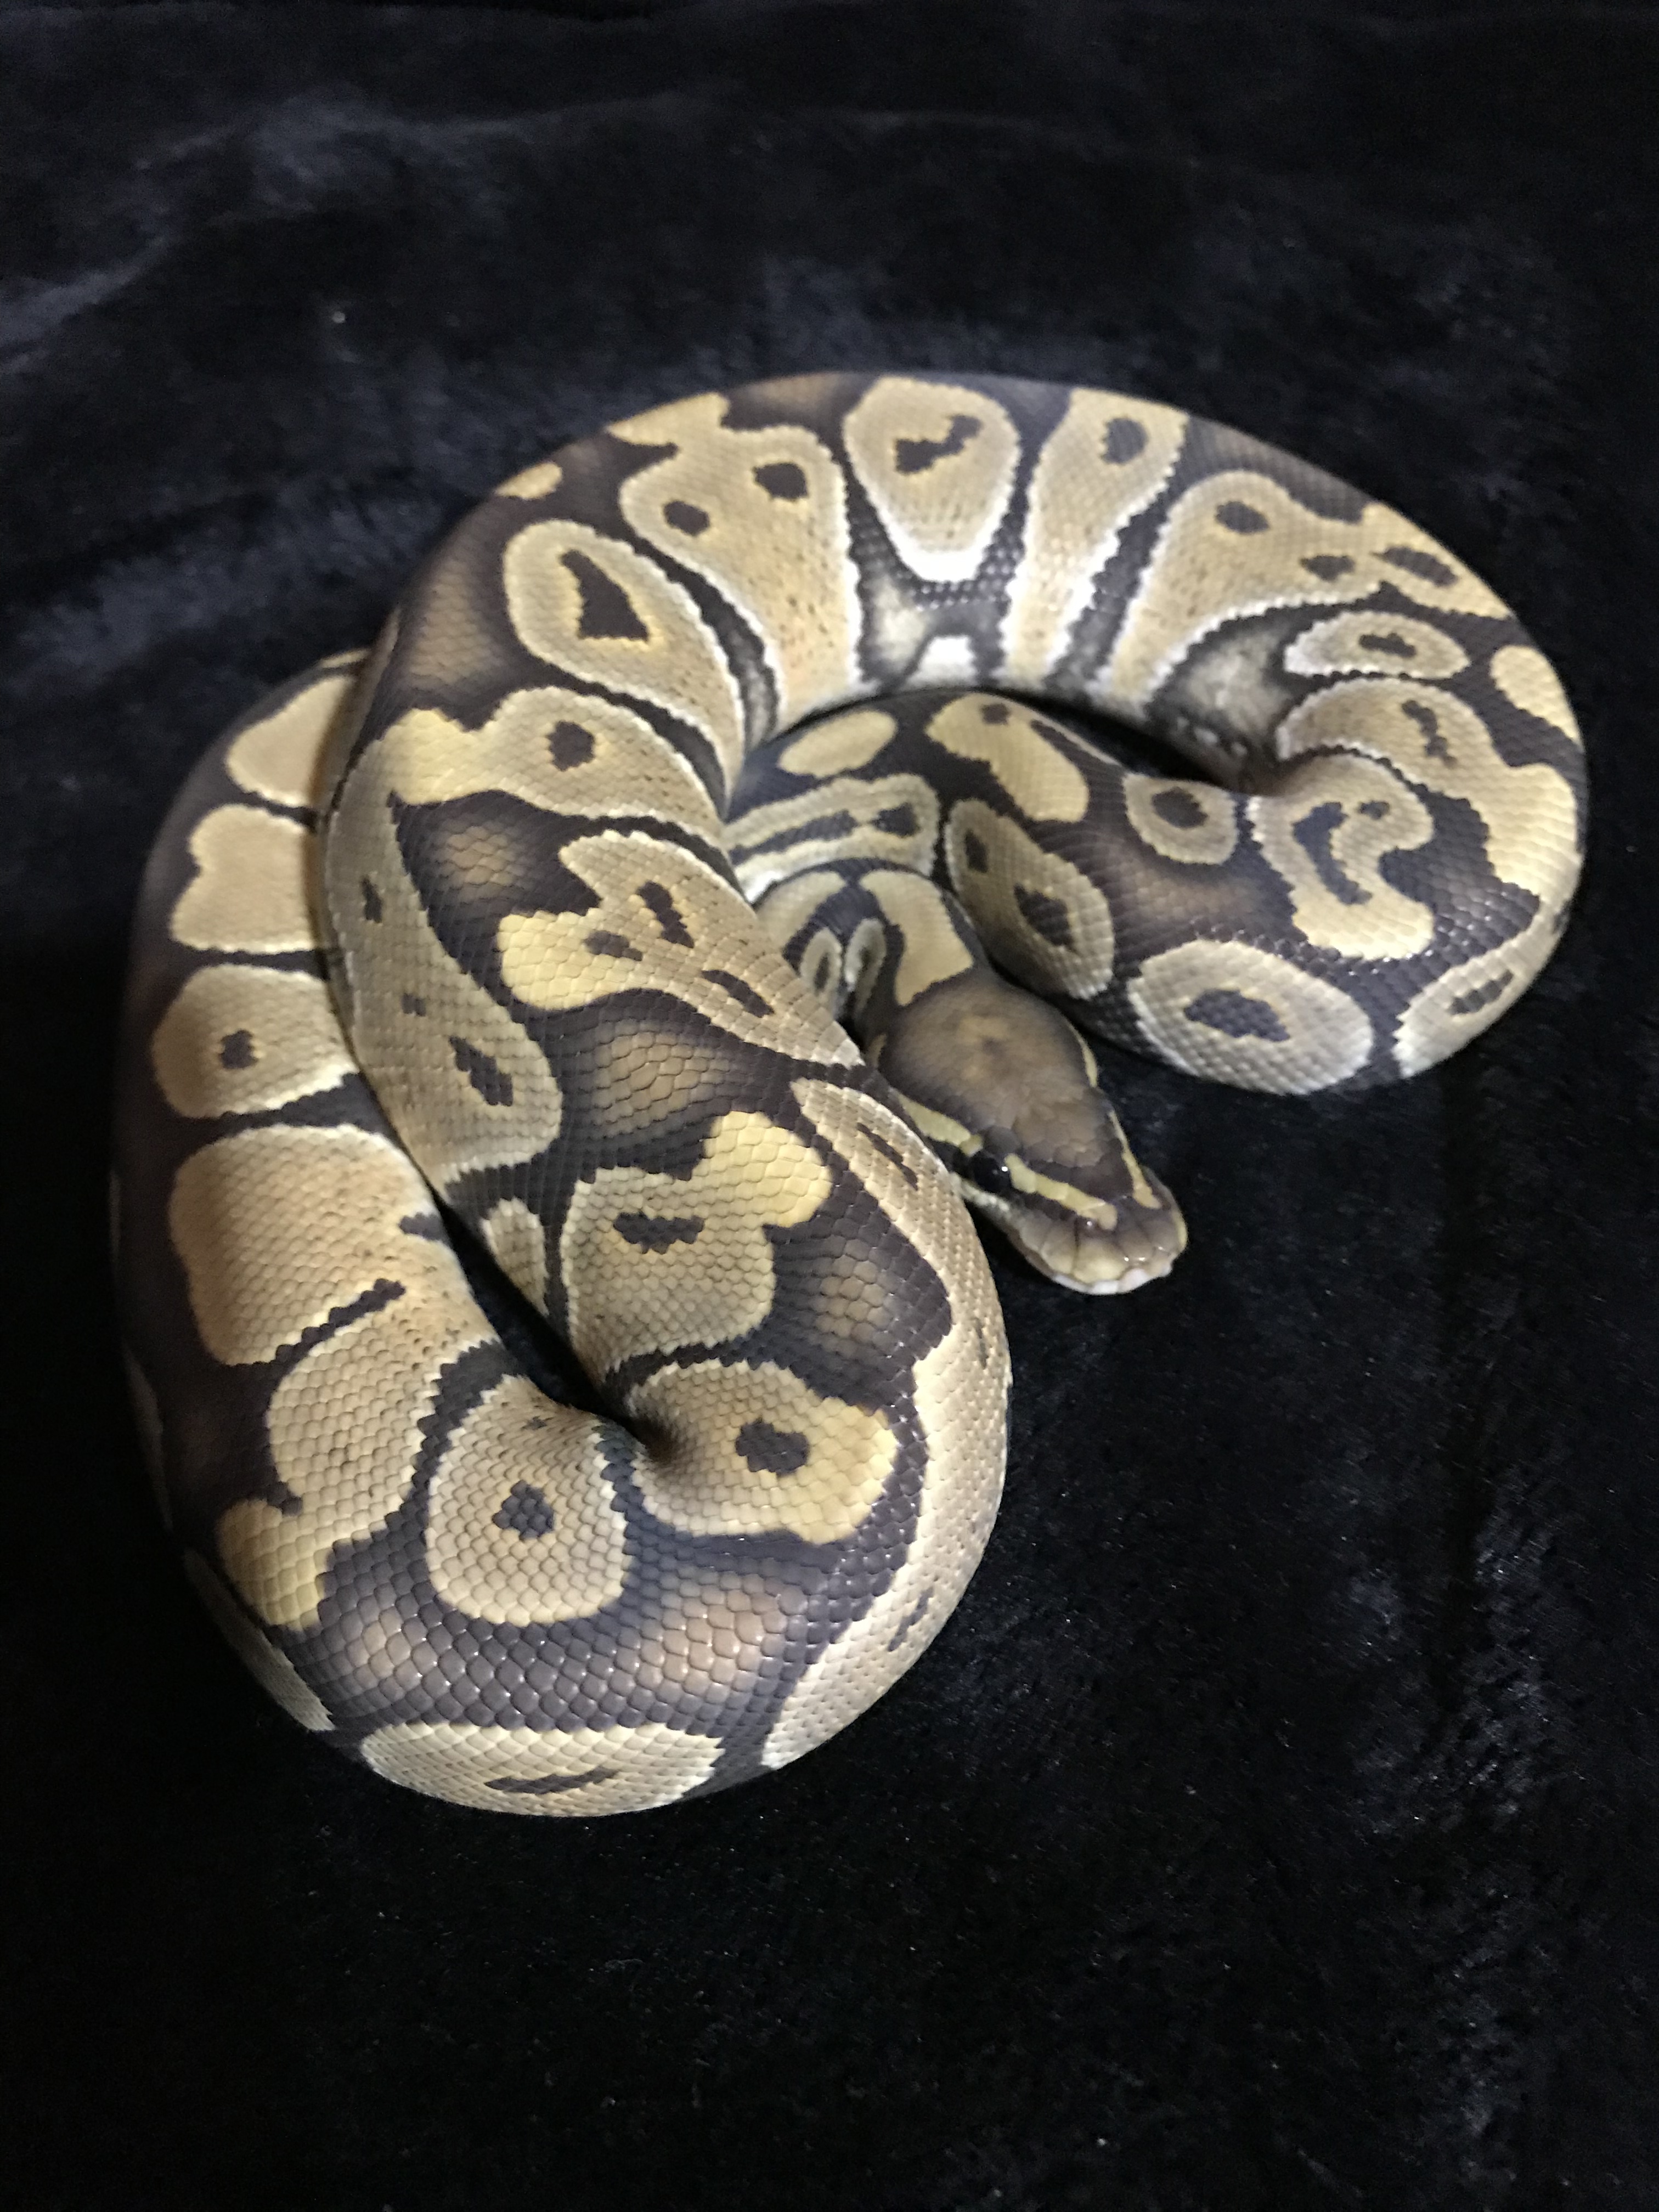 Orange Ghost Ball Python by From The Darkside